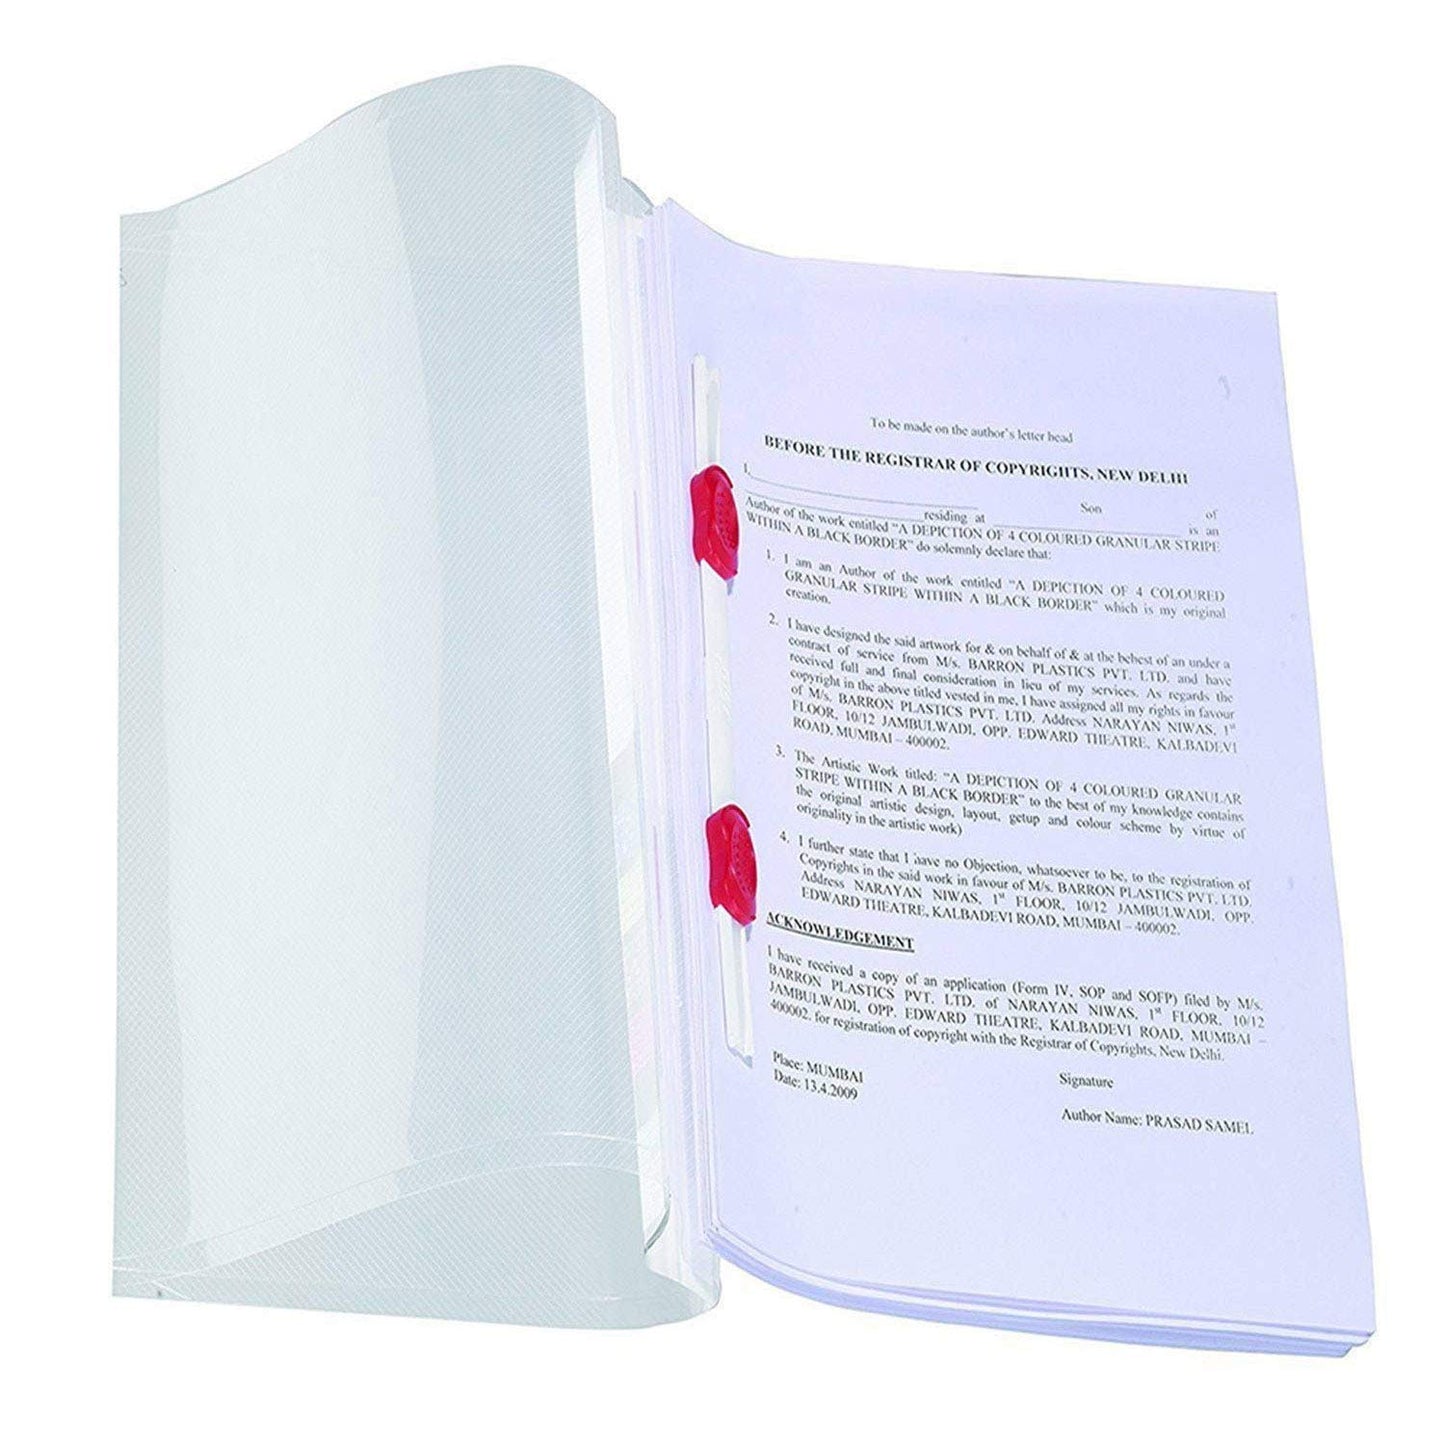 KIYA ® A4 Size Transparent Report File Folder Rf101 with Plastic Clip for Certificates, Office Documents, Reports, Page Holder, Presentation | Pack of 1 Pieces (Transparent)